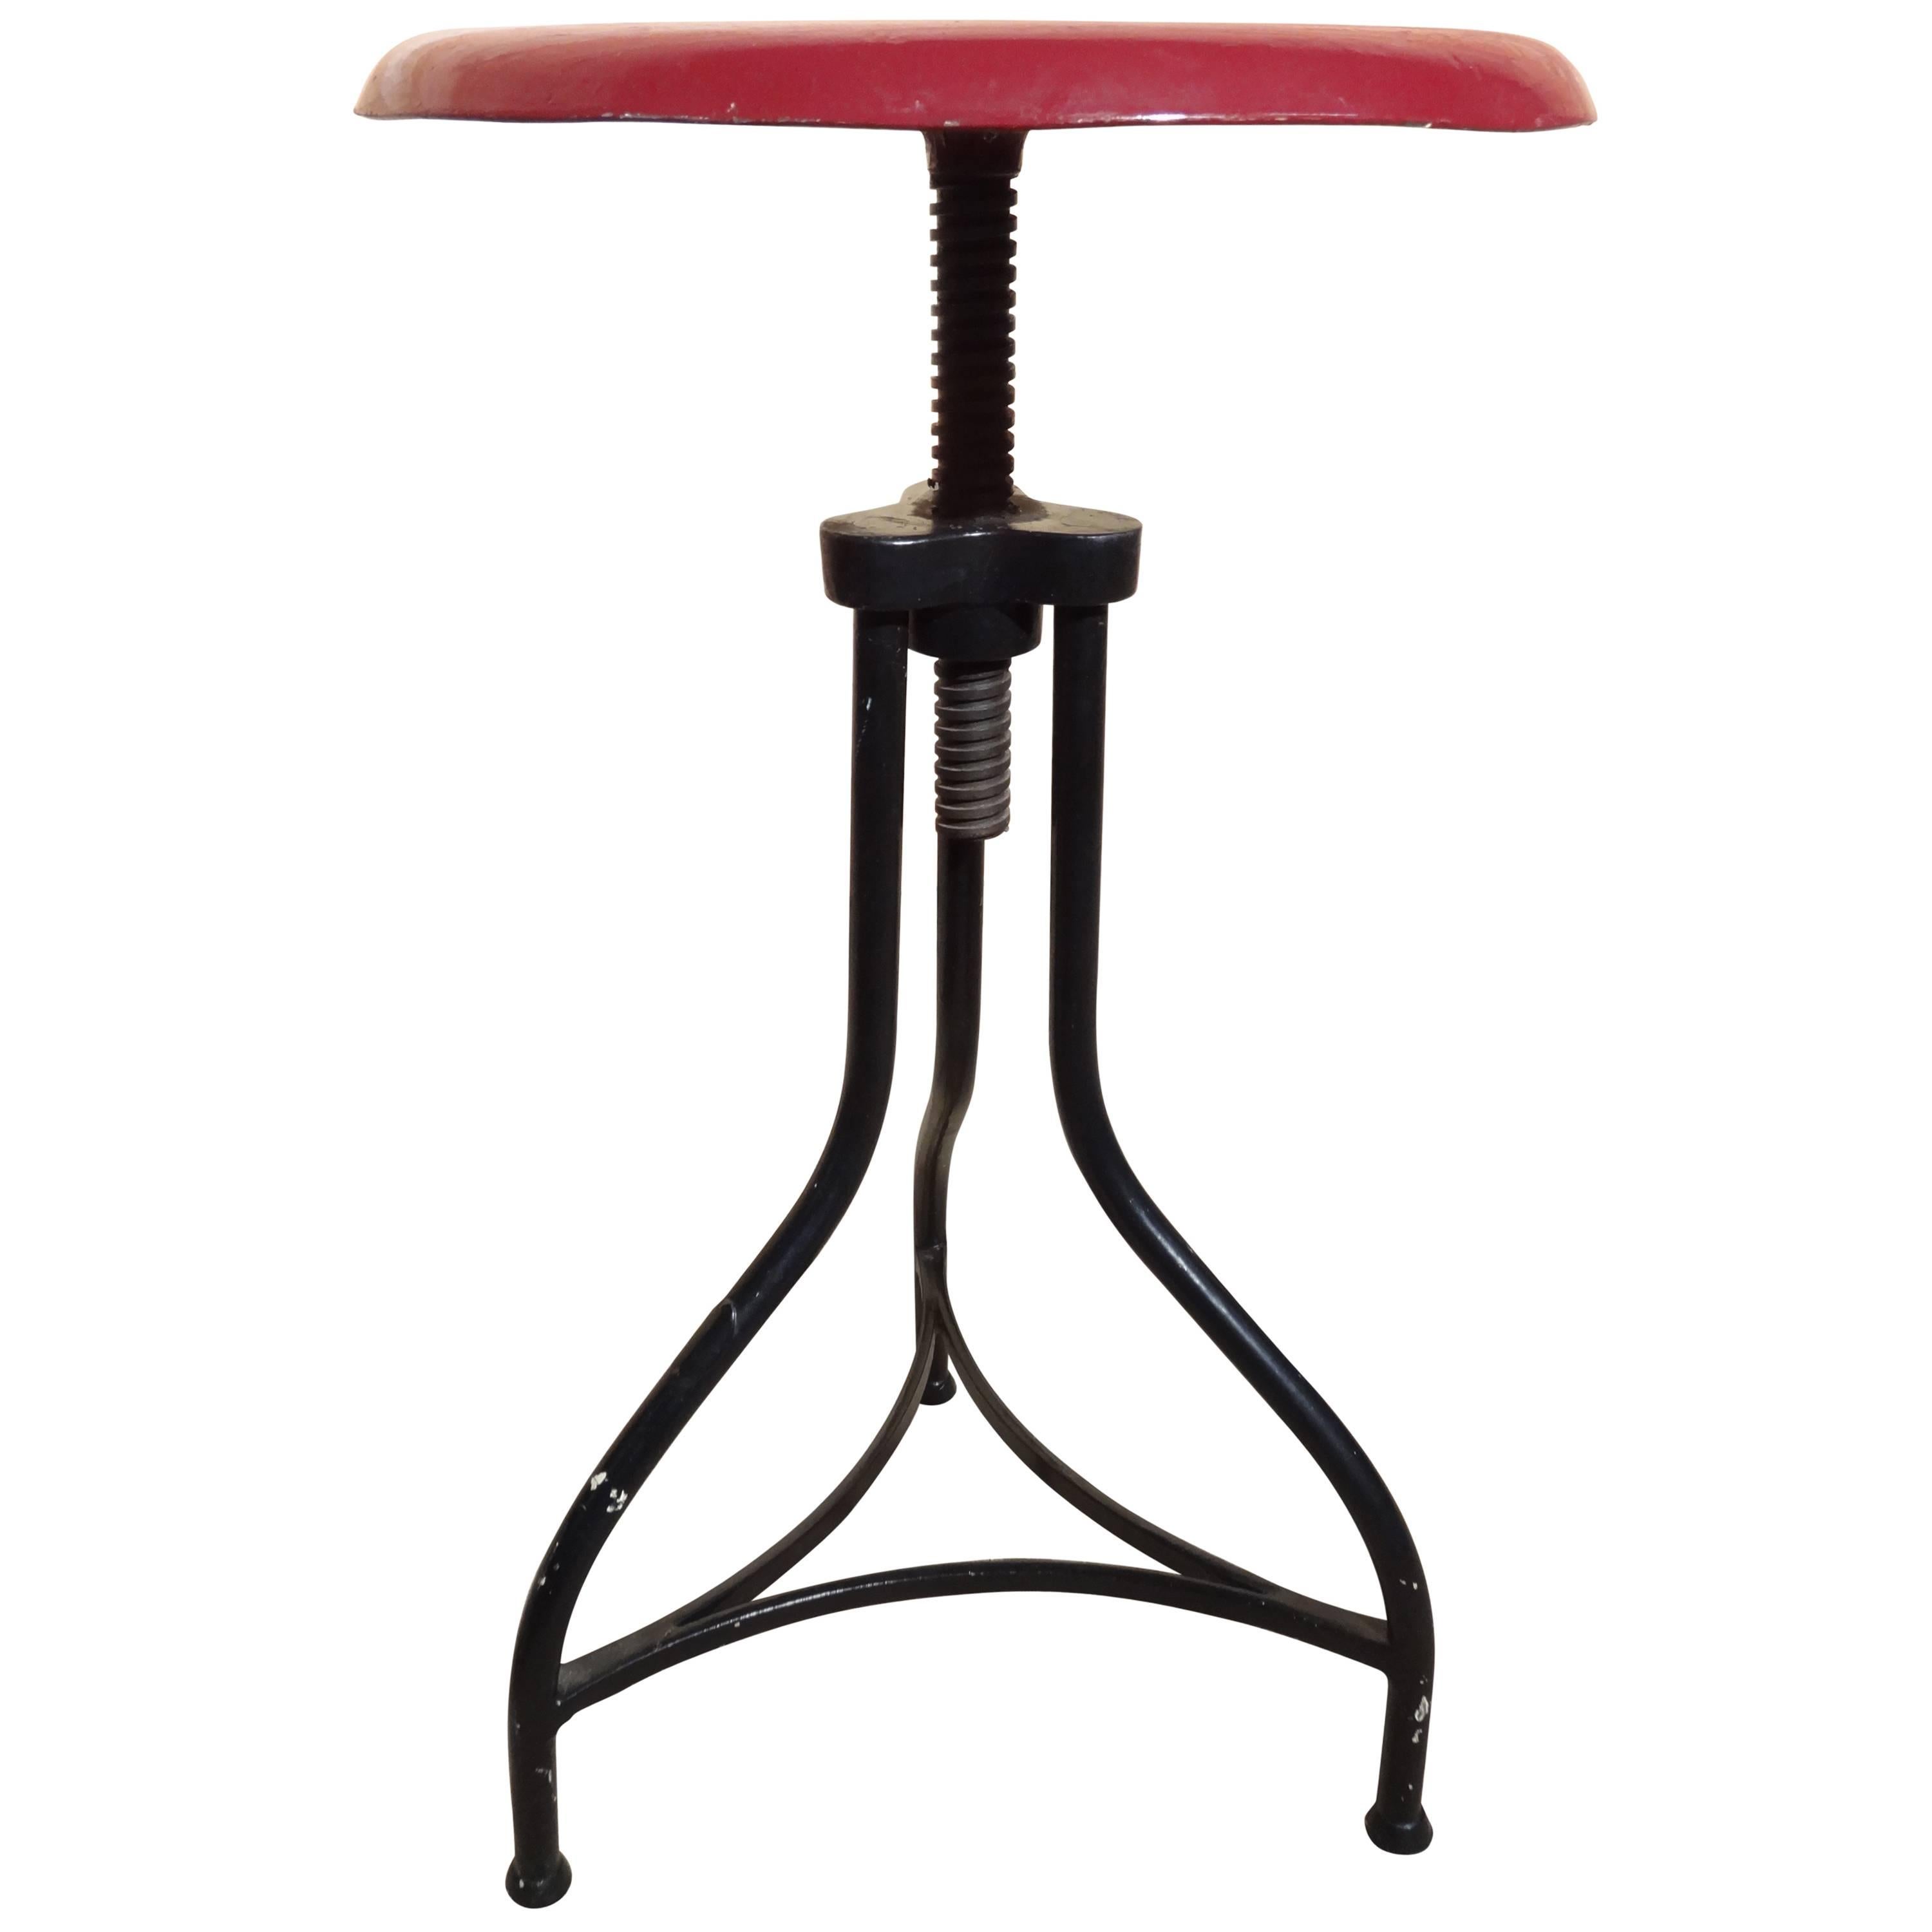 1930s Metal French Industrial Stool with Red Seat